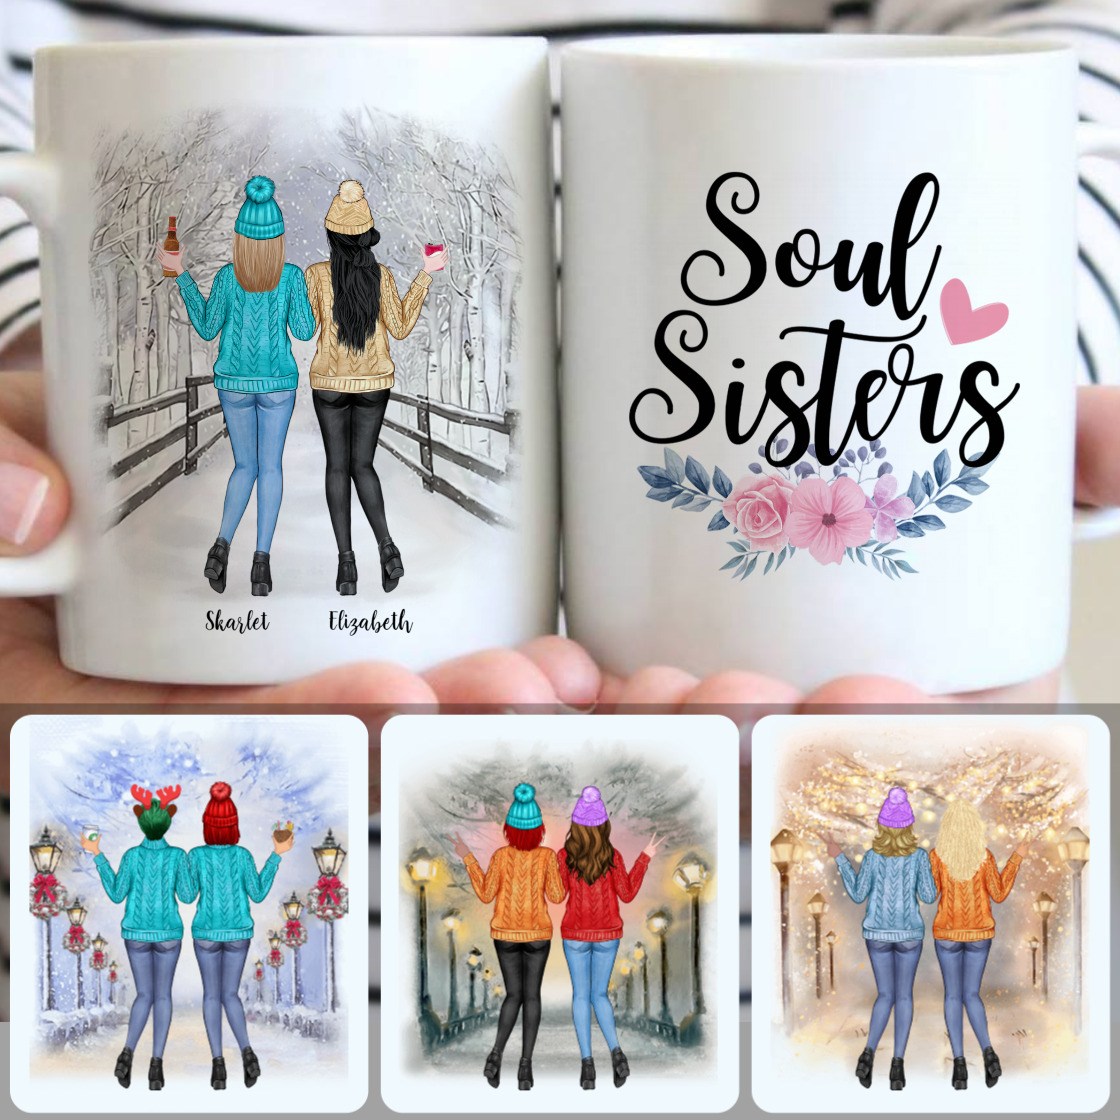 Personalized Mug, Unique Christmas Gifts, 2 Soul Sisters Customized Coffee Mug With Names